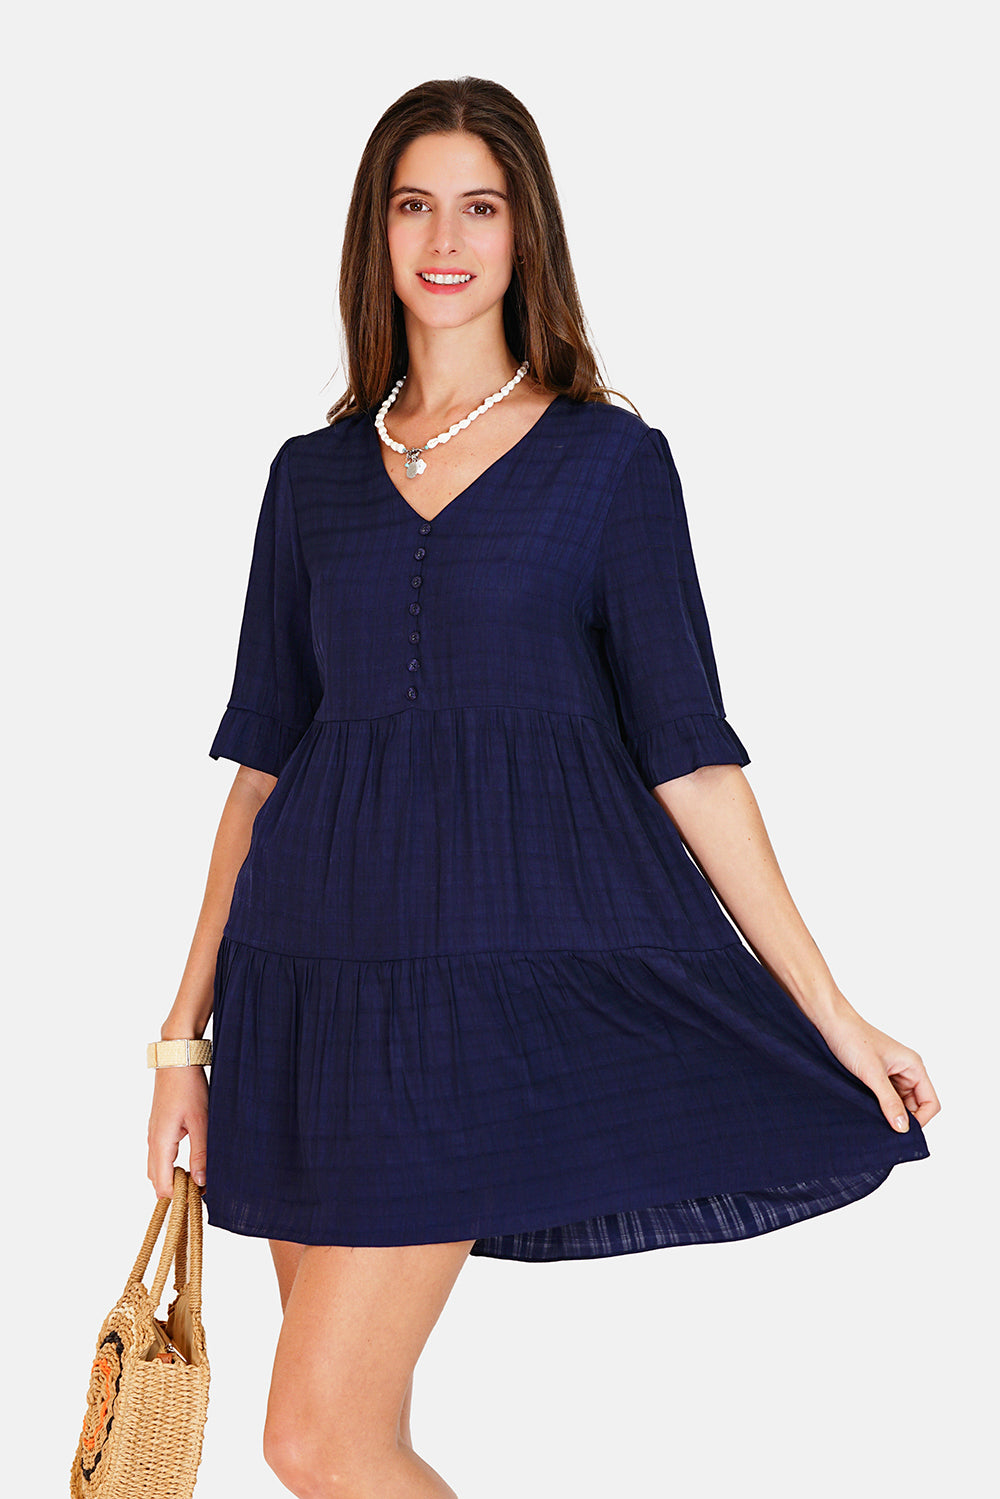 V-neck babydoll dress with 3/4 sleeves